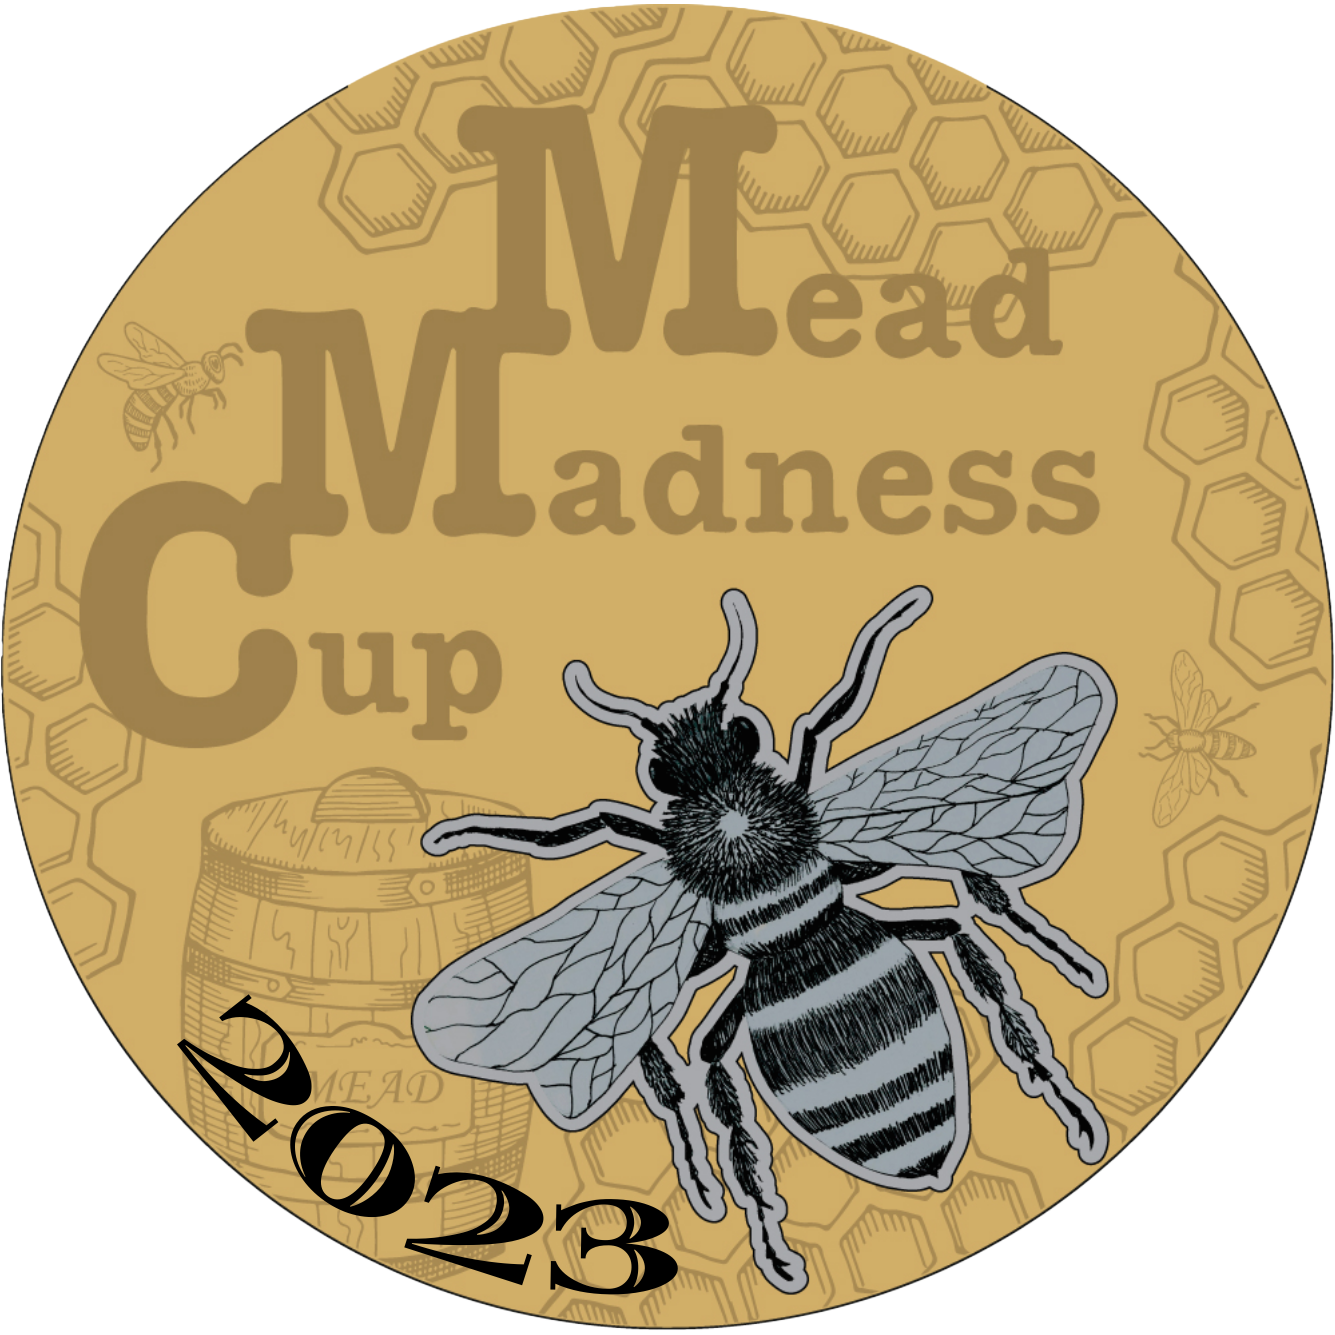 Mead Madness Cup Goldmedaillie